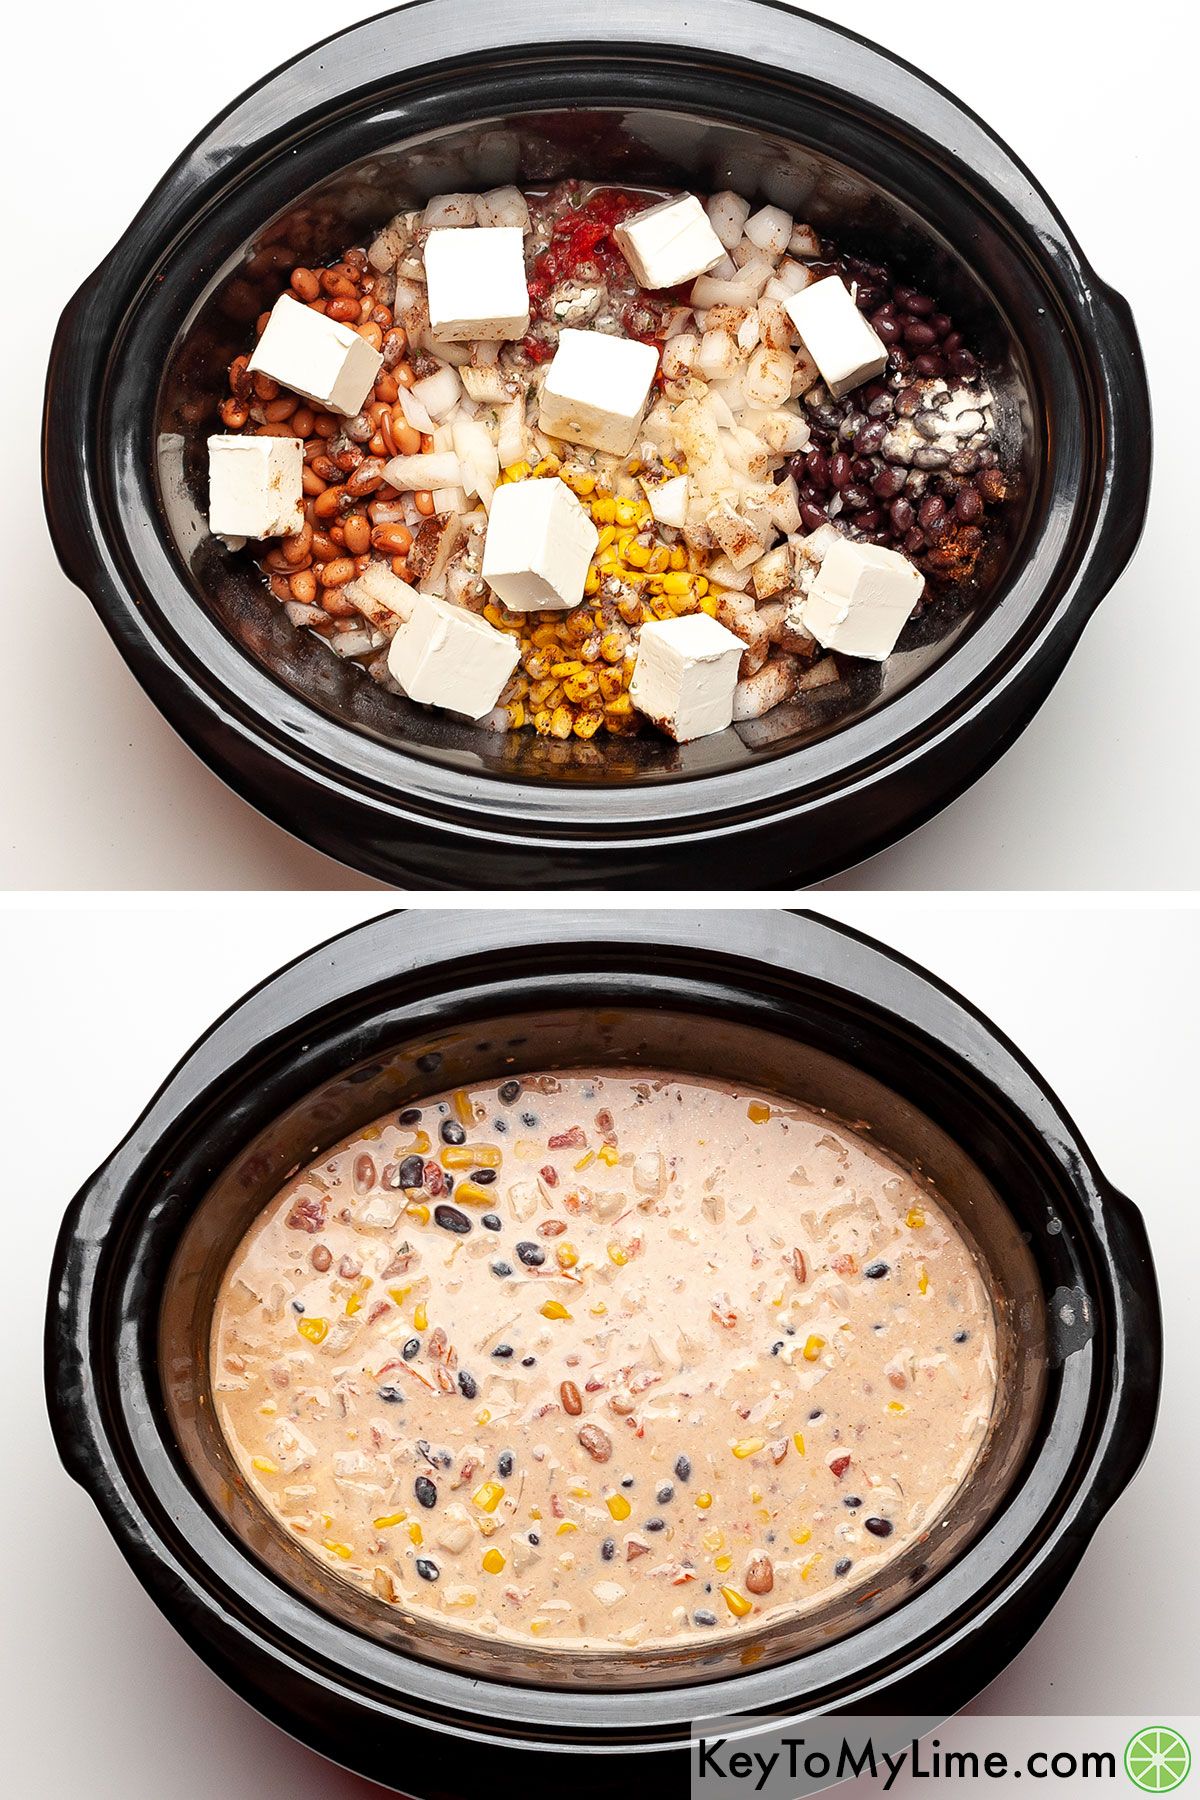 A process collage showing the addition of cream cheese to the chili ingredients, and then what it looks like after cooking in the slow cooker.